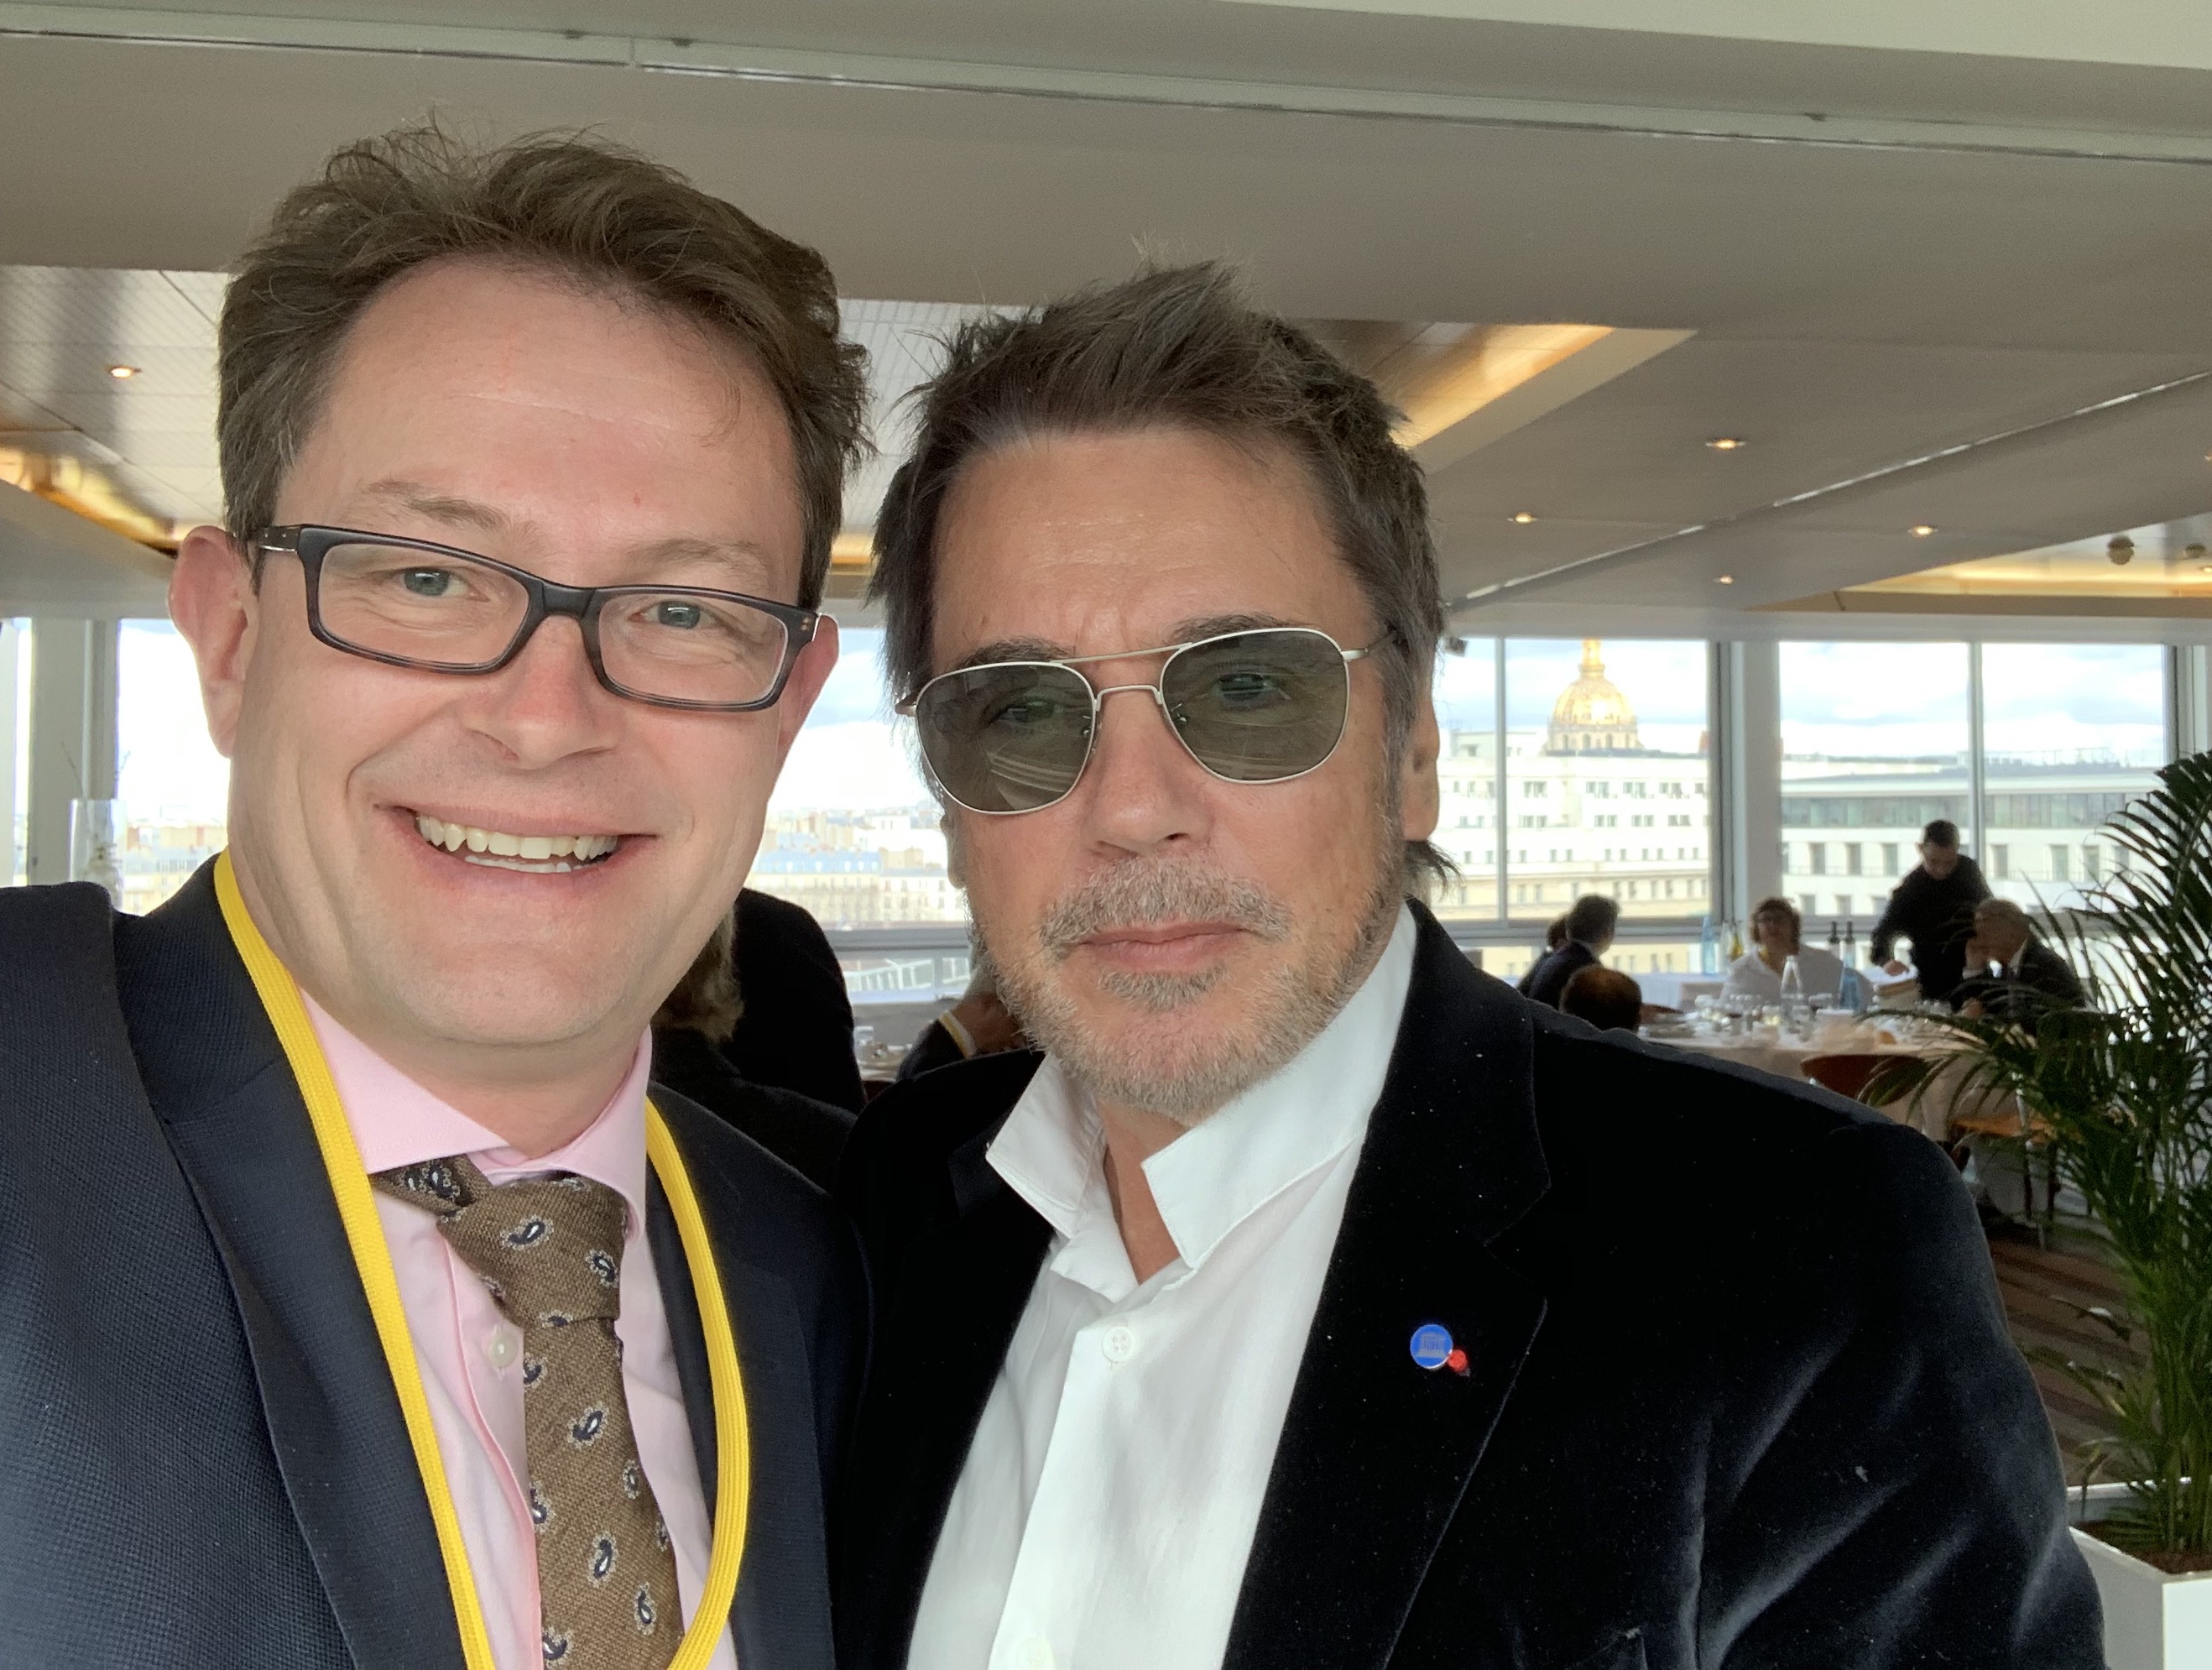 UNESCO Conference on Principles for AI, 2019 (with Jean-Michel Jarre)